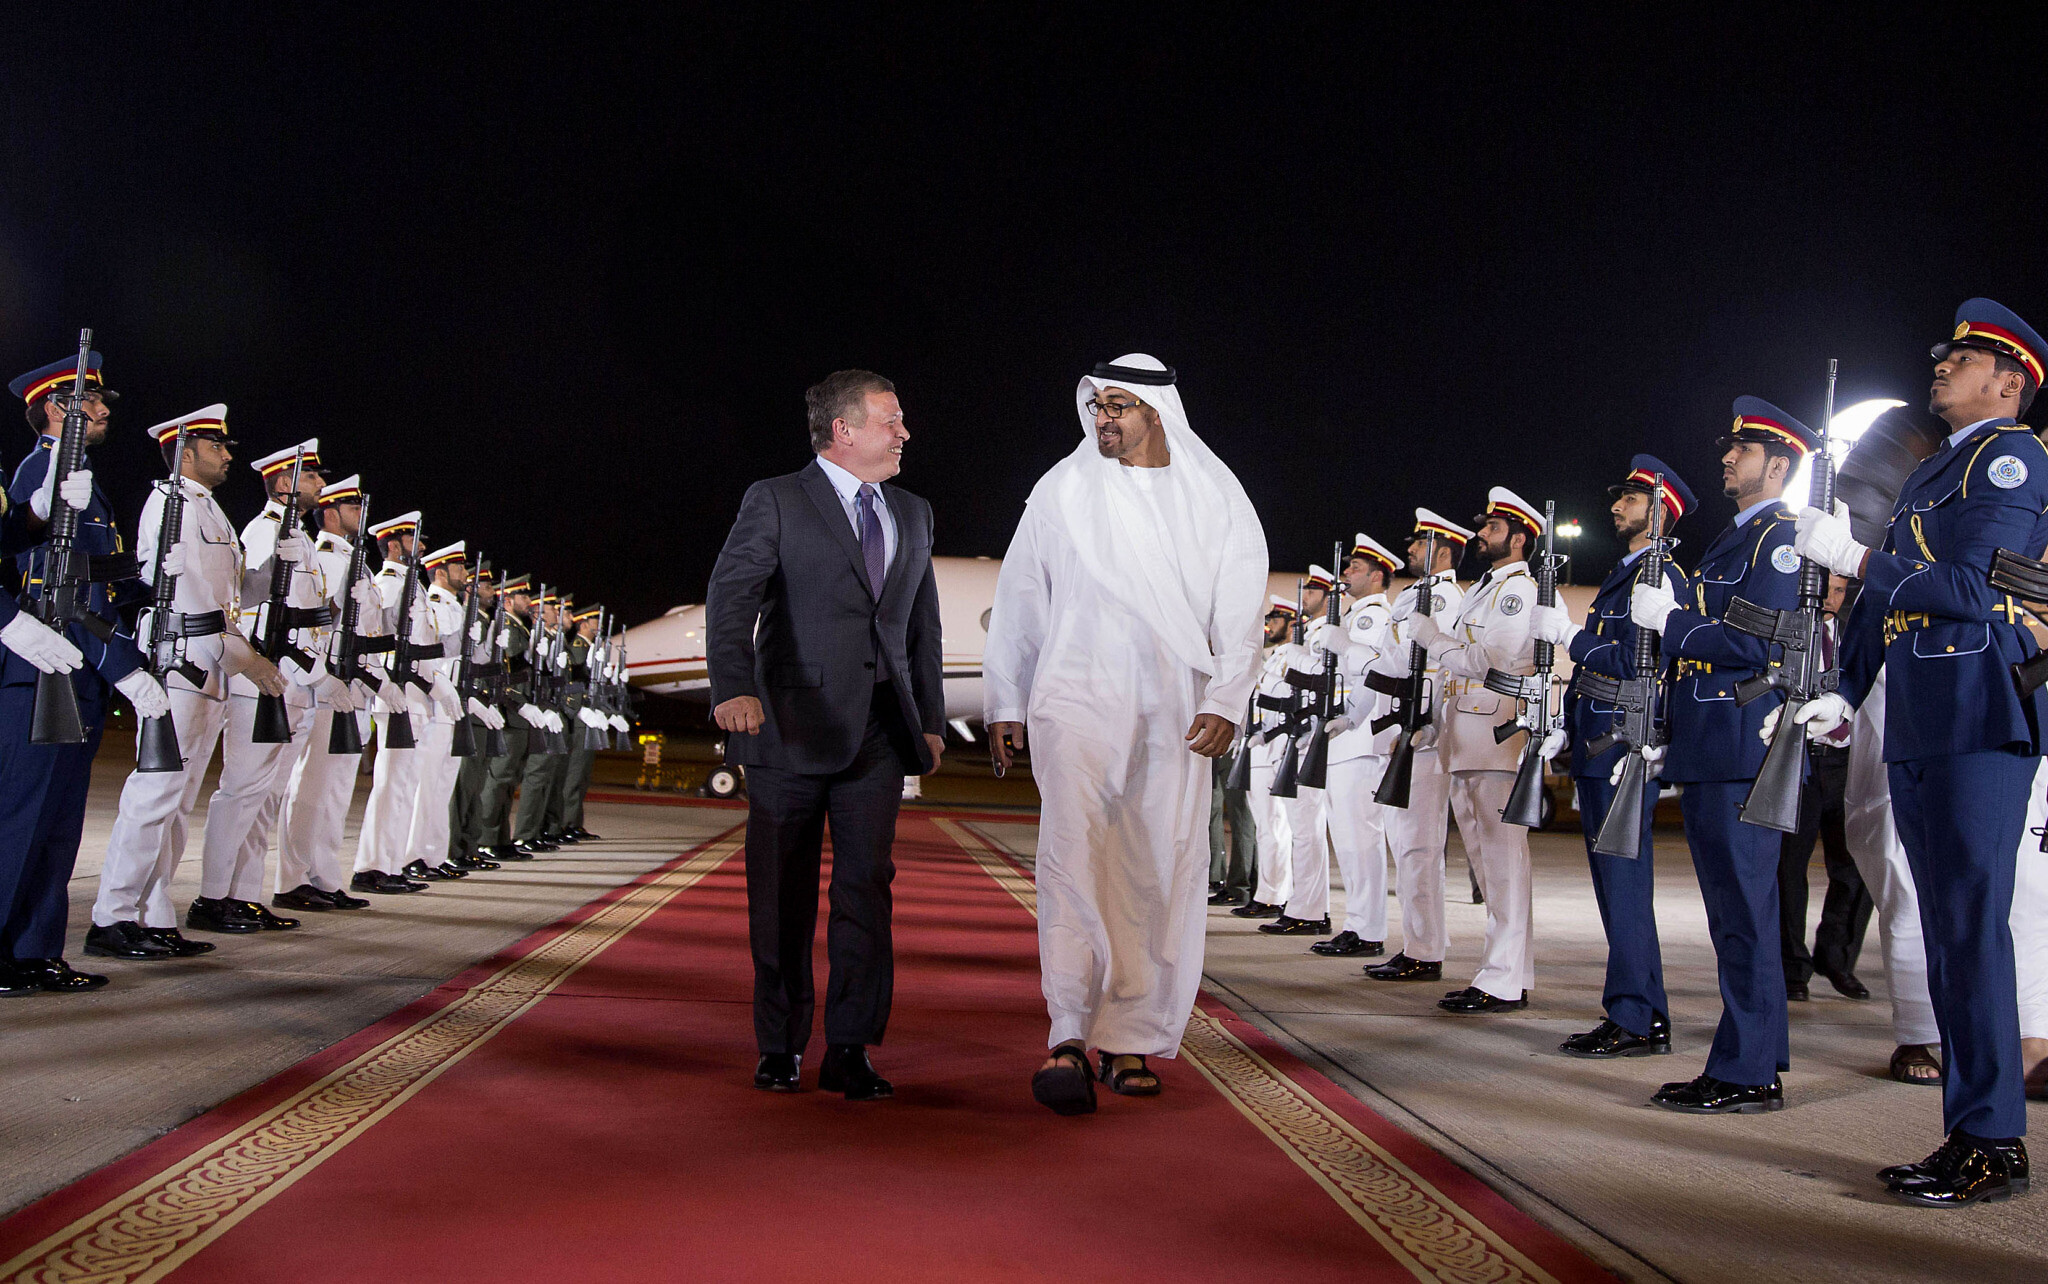 Jordanian heads to UAE for trilateral summit with Emirati, Bahraini leaders | The Times of Israel